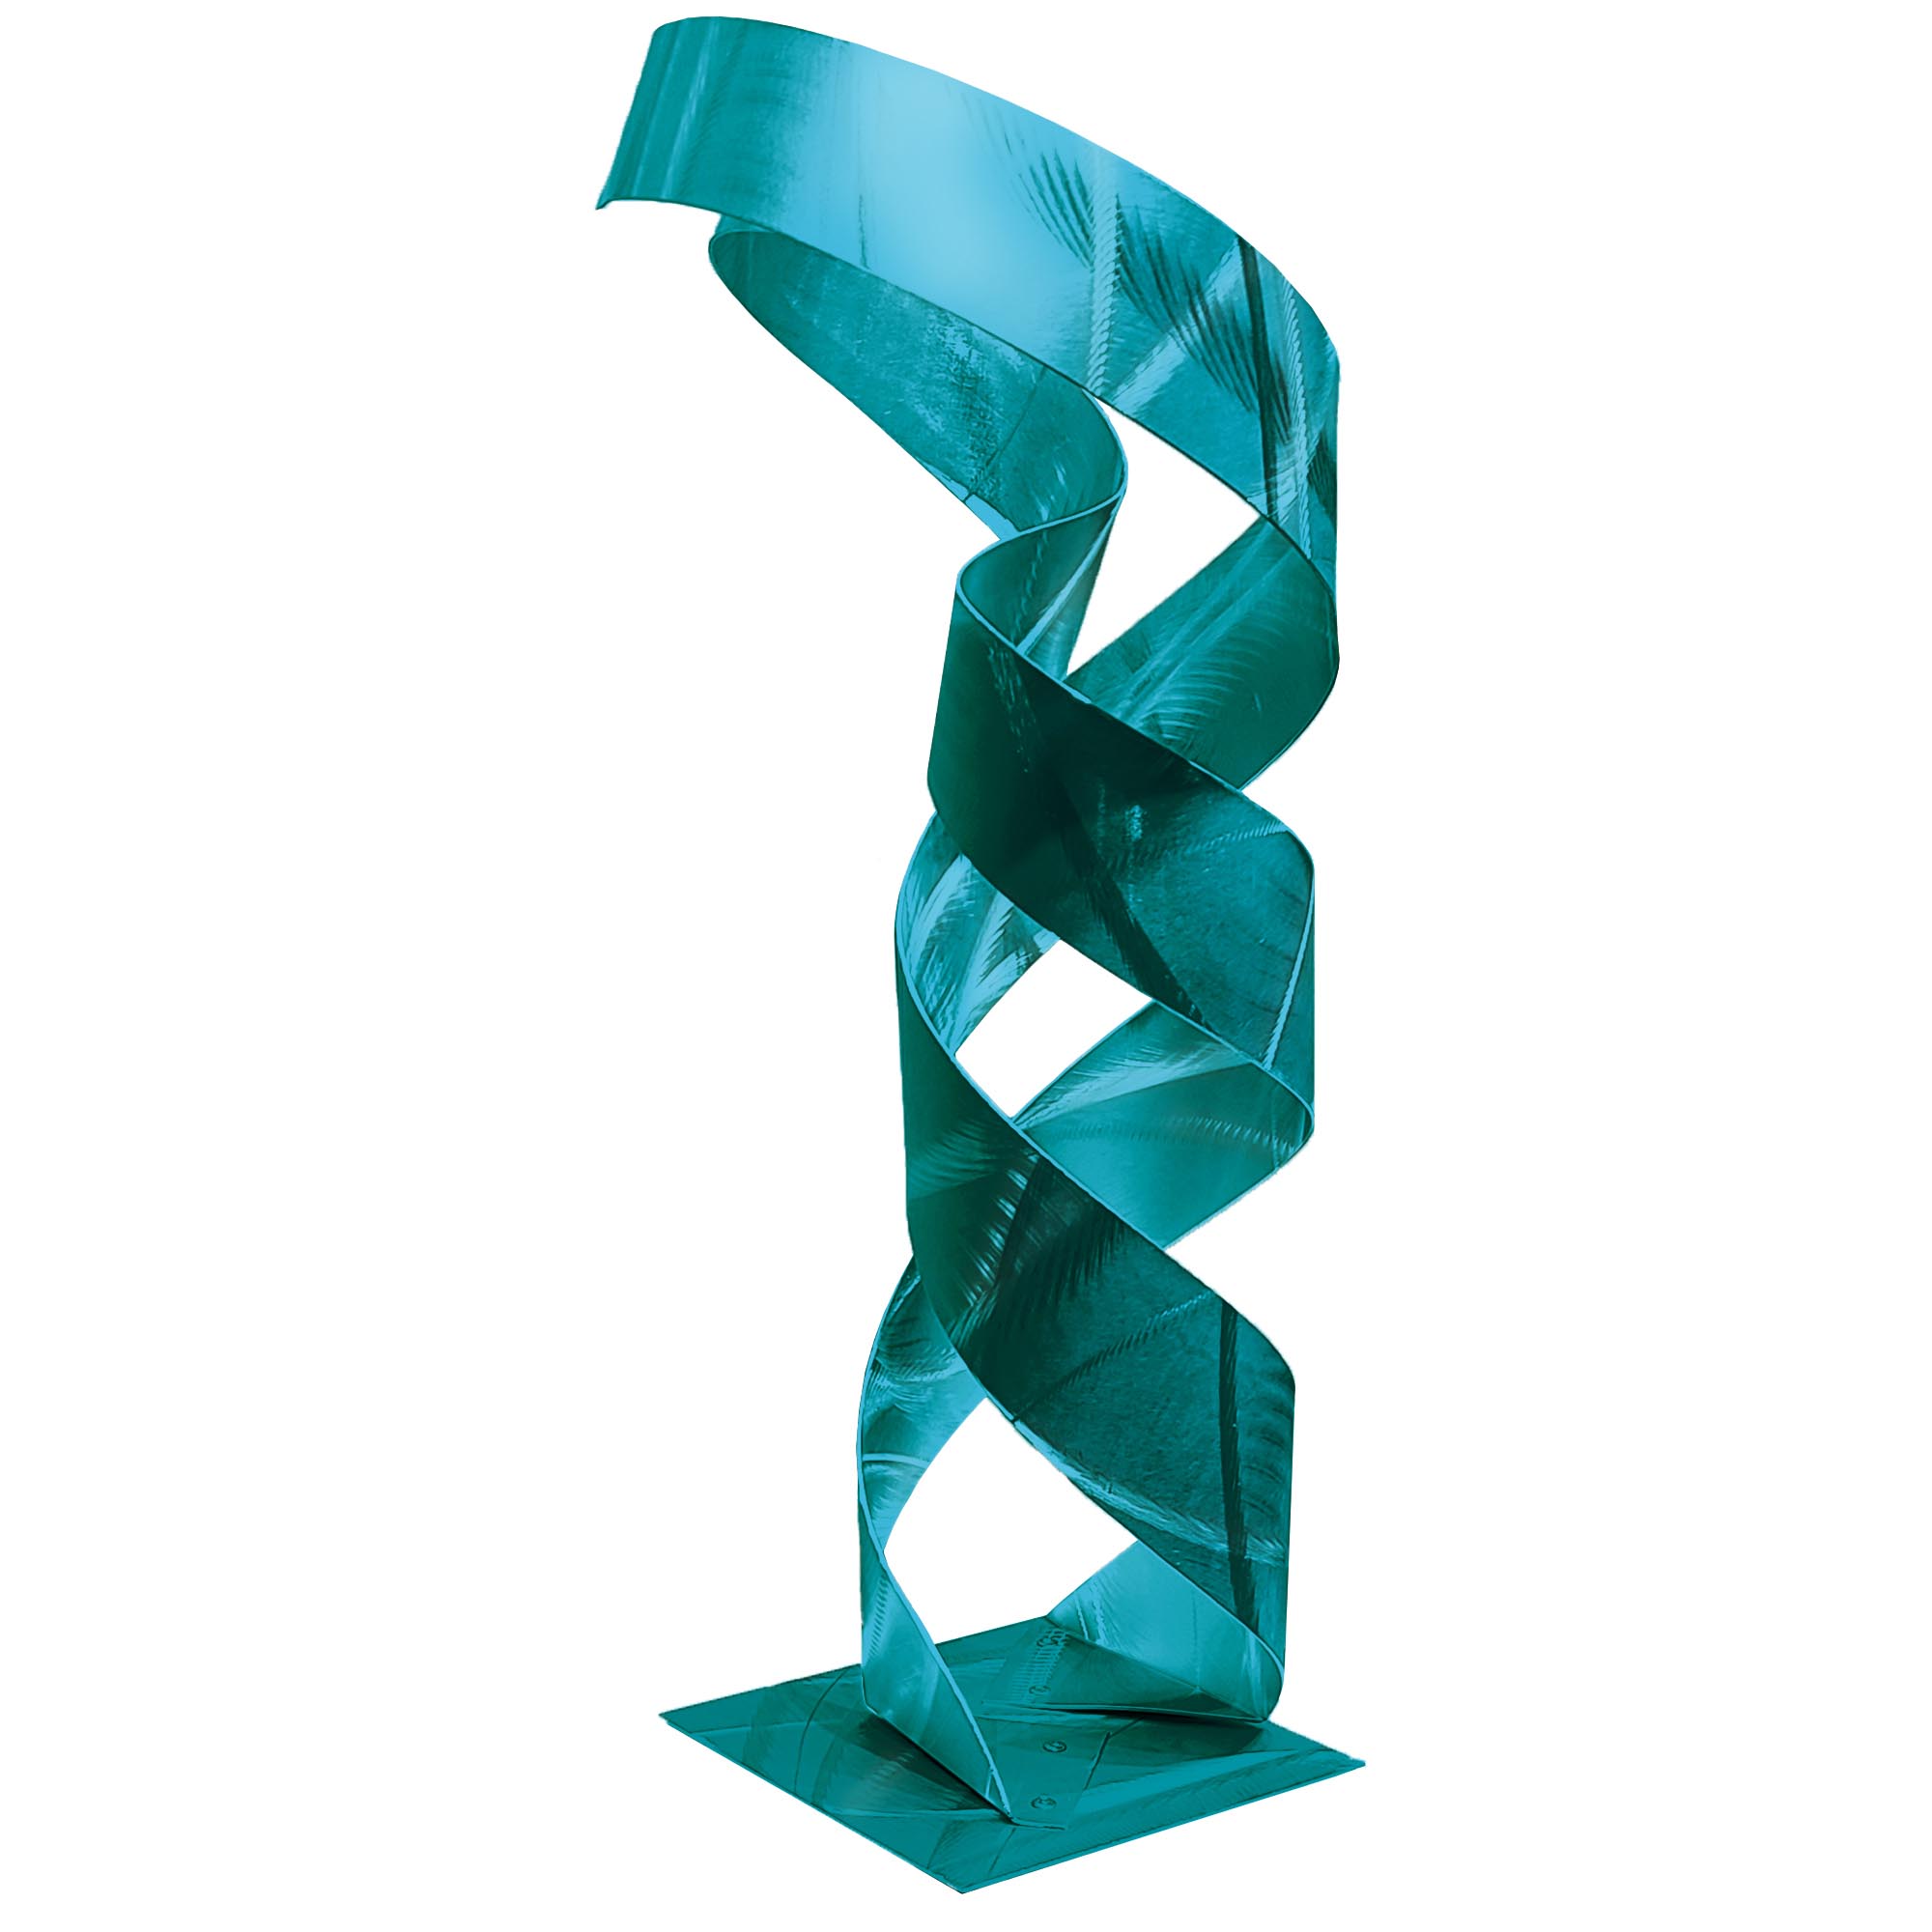 Continuum in Teal by Carlos Jacobs - Metal Sculpture, Modern Decor (10x25in.) - Image 2